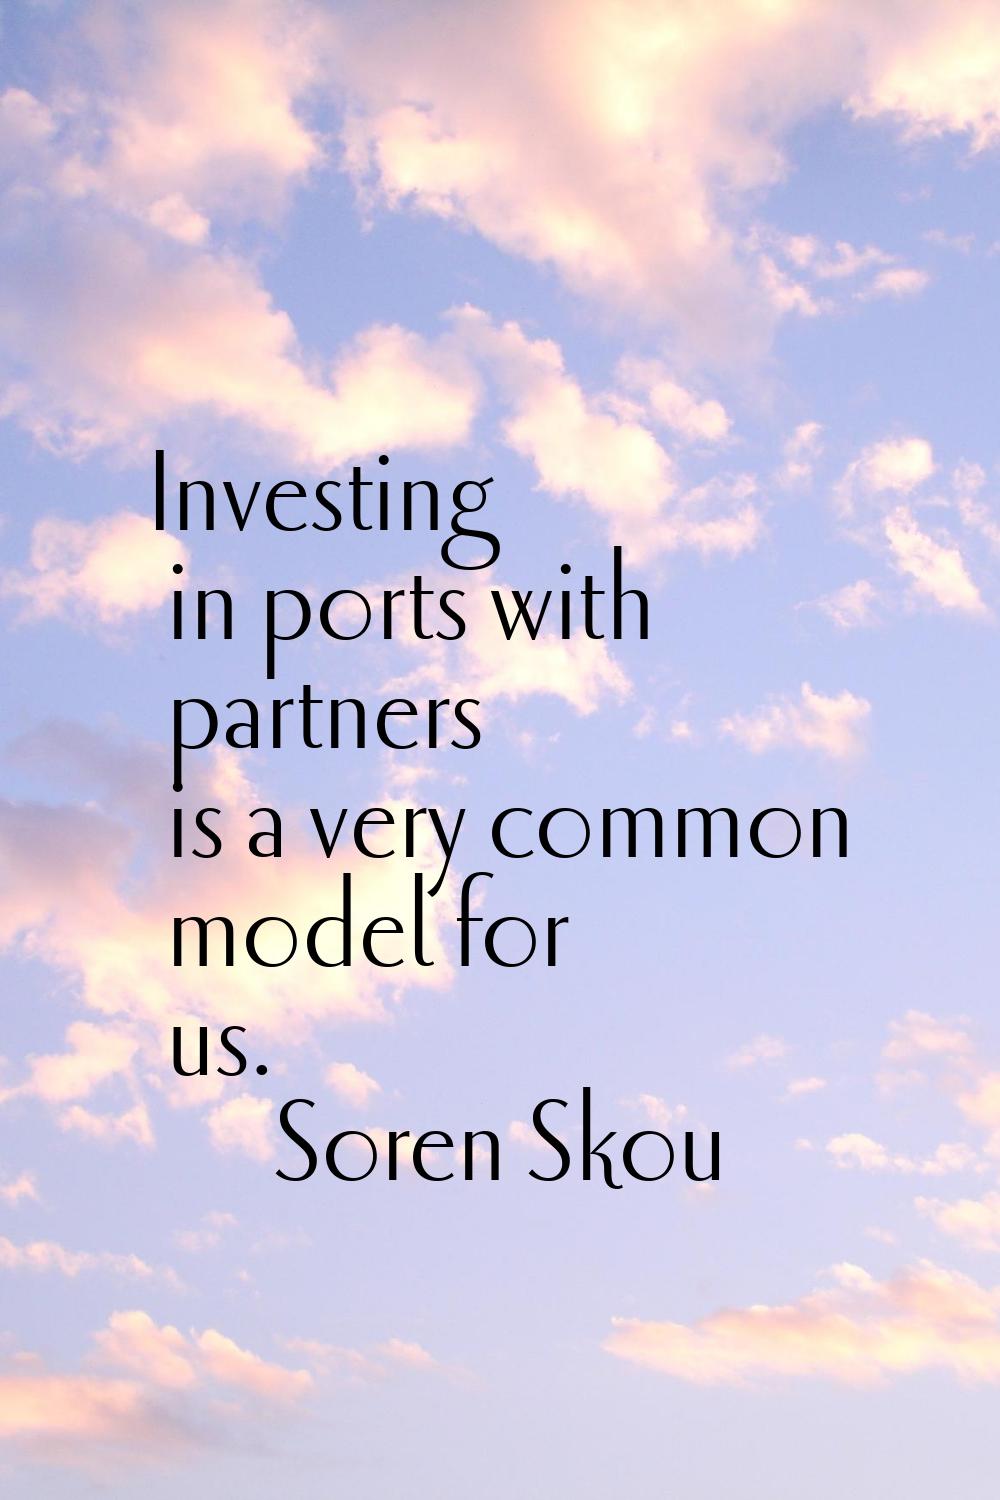 Investing in ports with partners is a very common model for us.